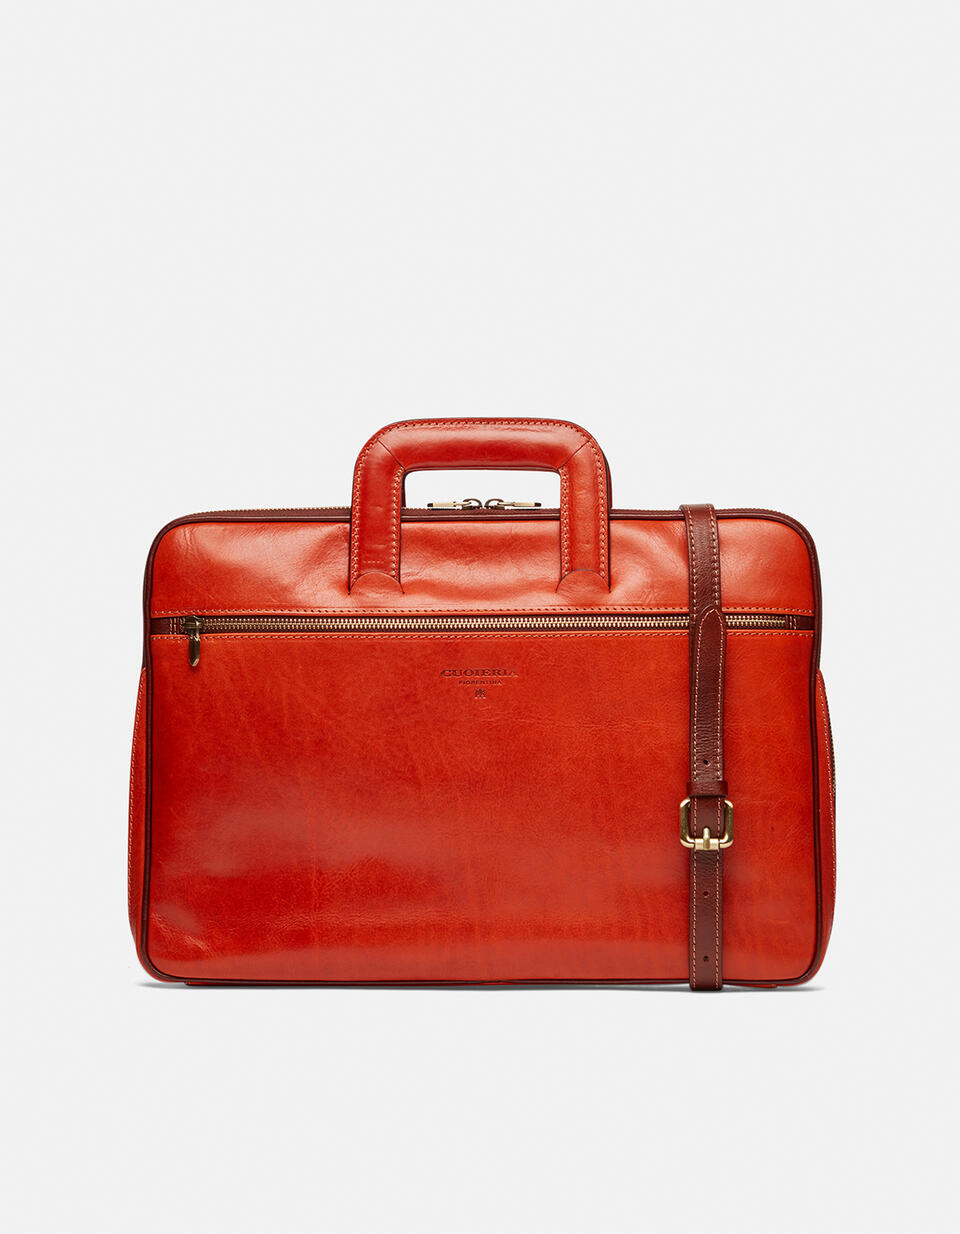 Laptop leather bag - Briefcases and Laptop Bags | Briefcases ARANCIOBICOLORE - Briefcases and Laptop Bags | BriefcasesCuoieria Fiorentina